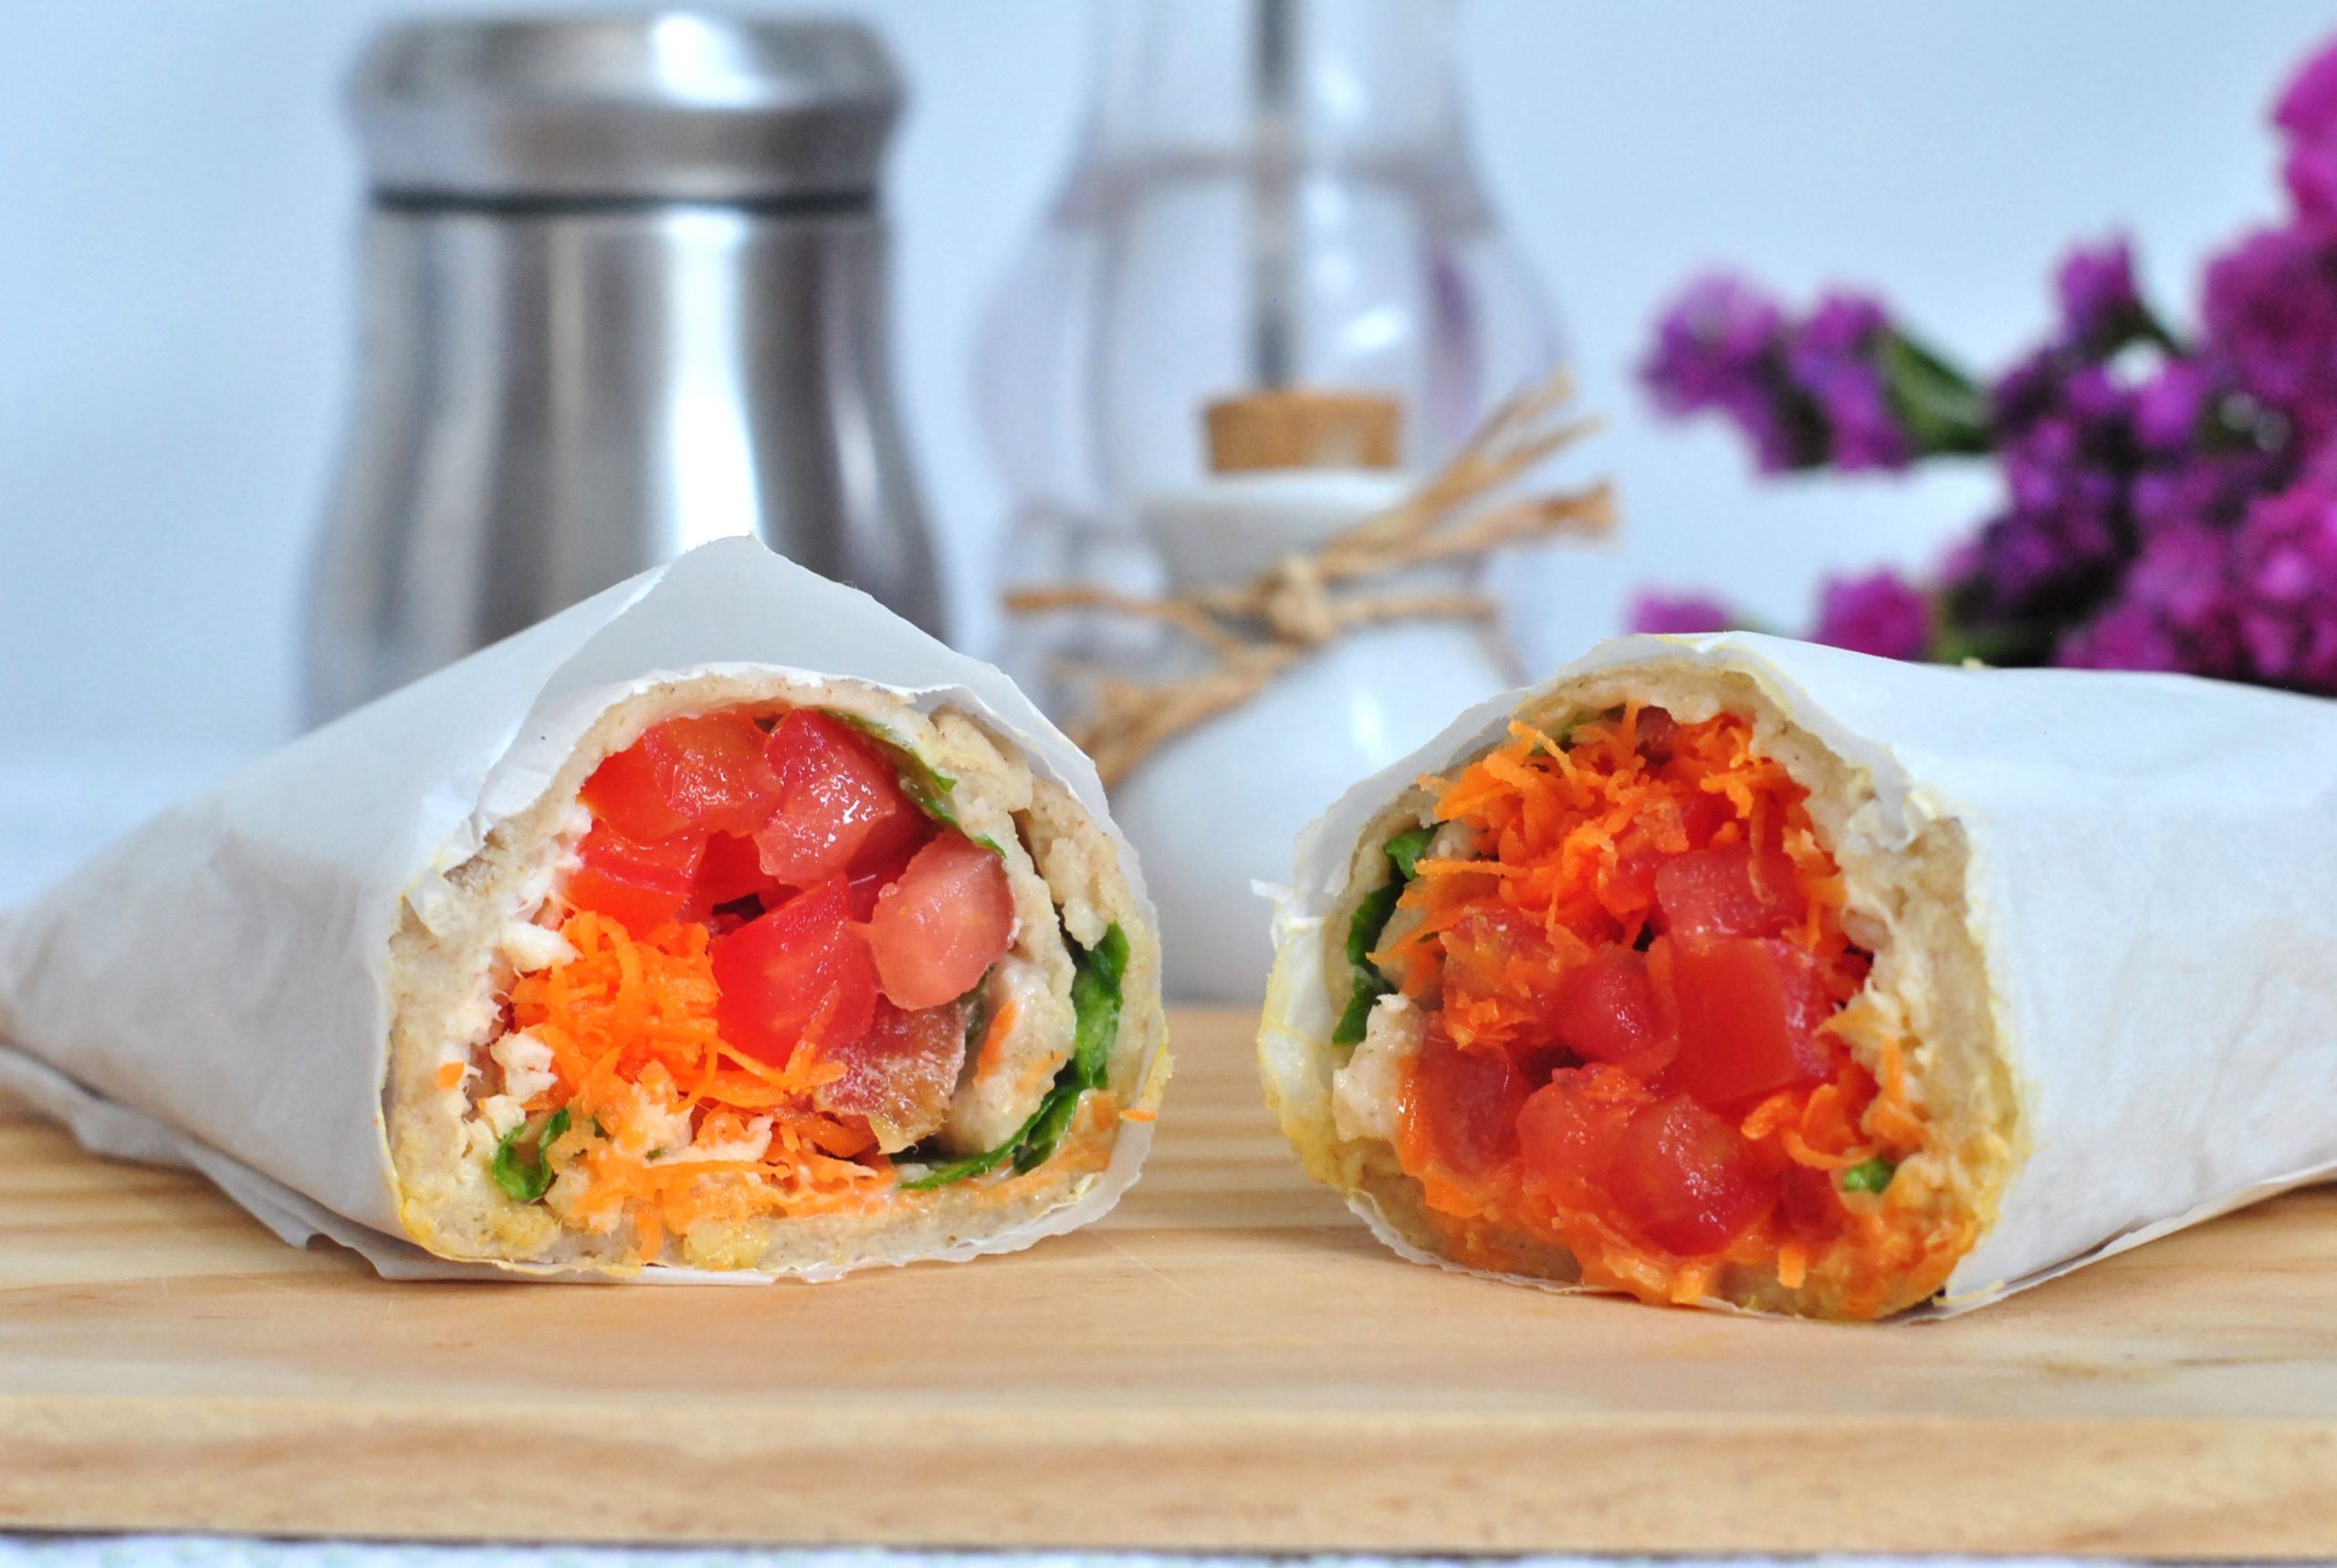 Wrap 10 gluten and lactose